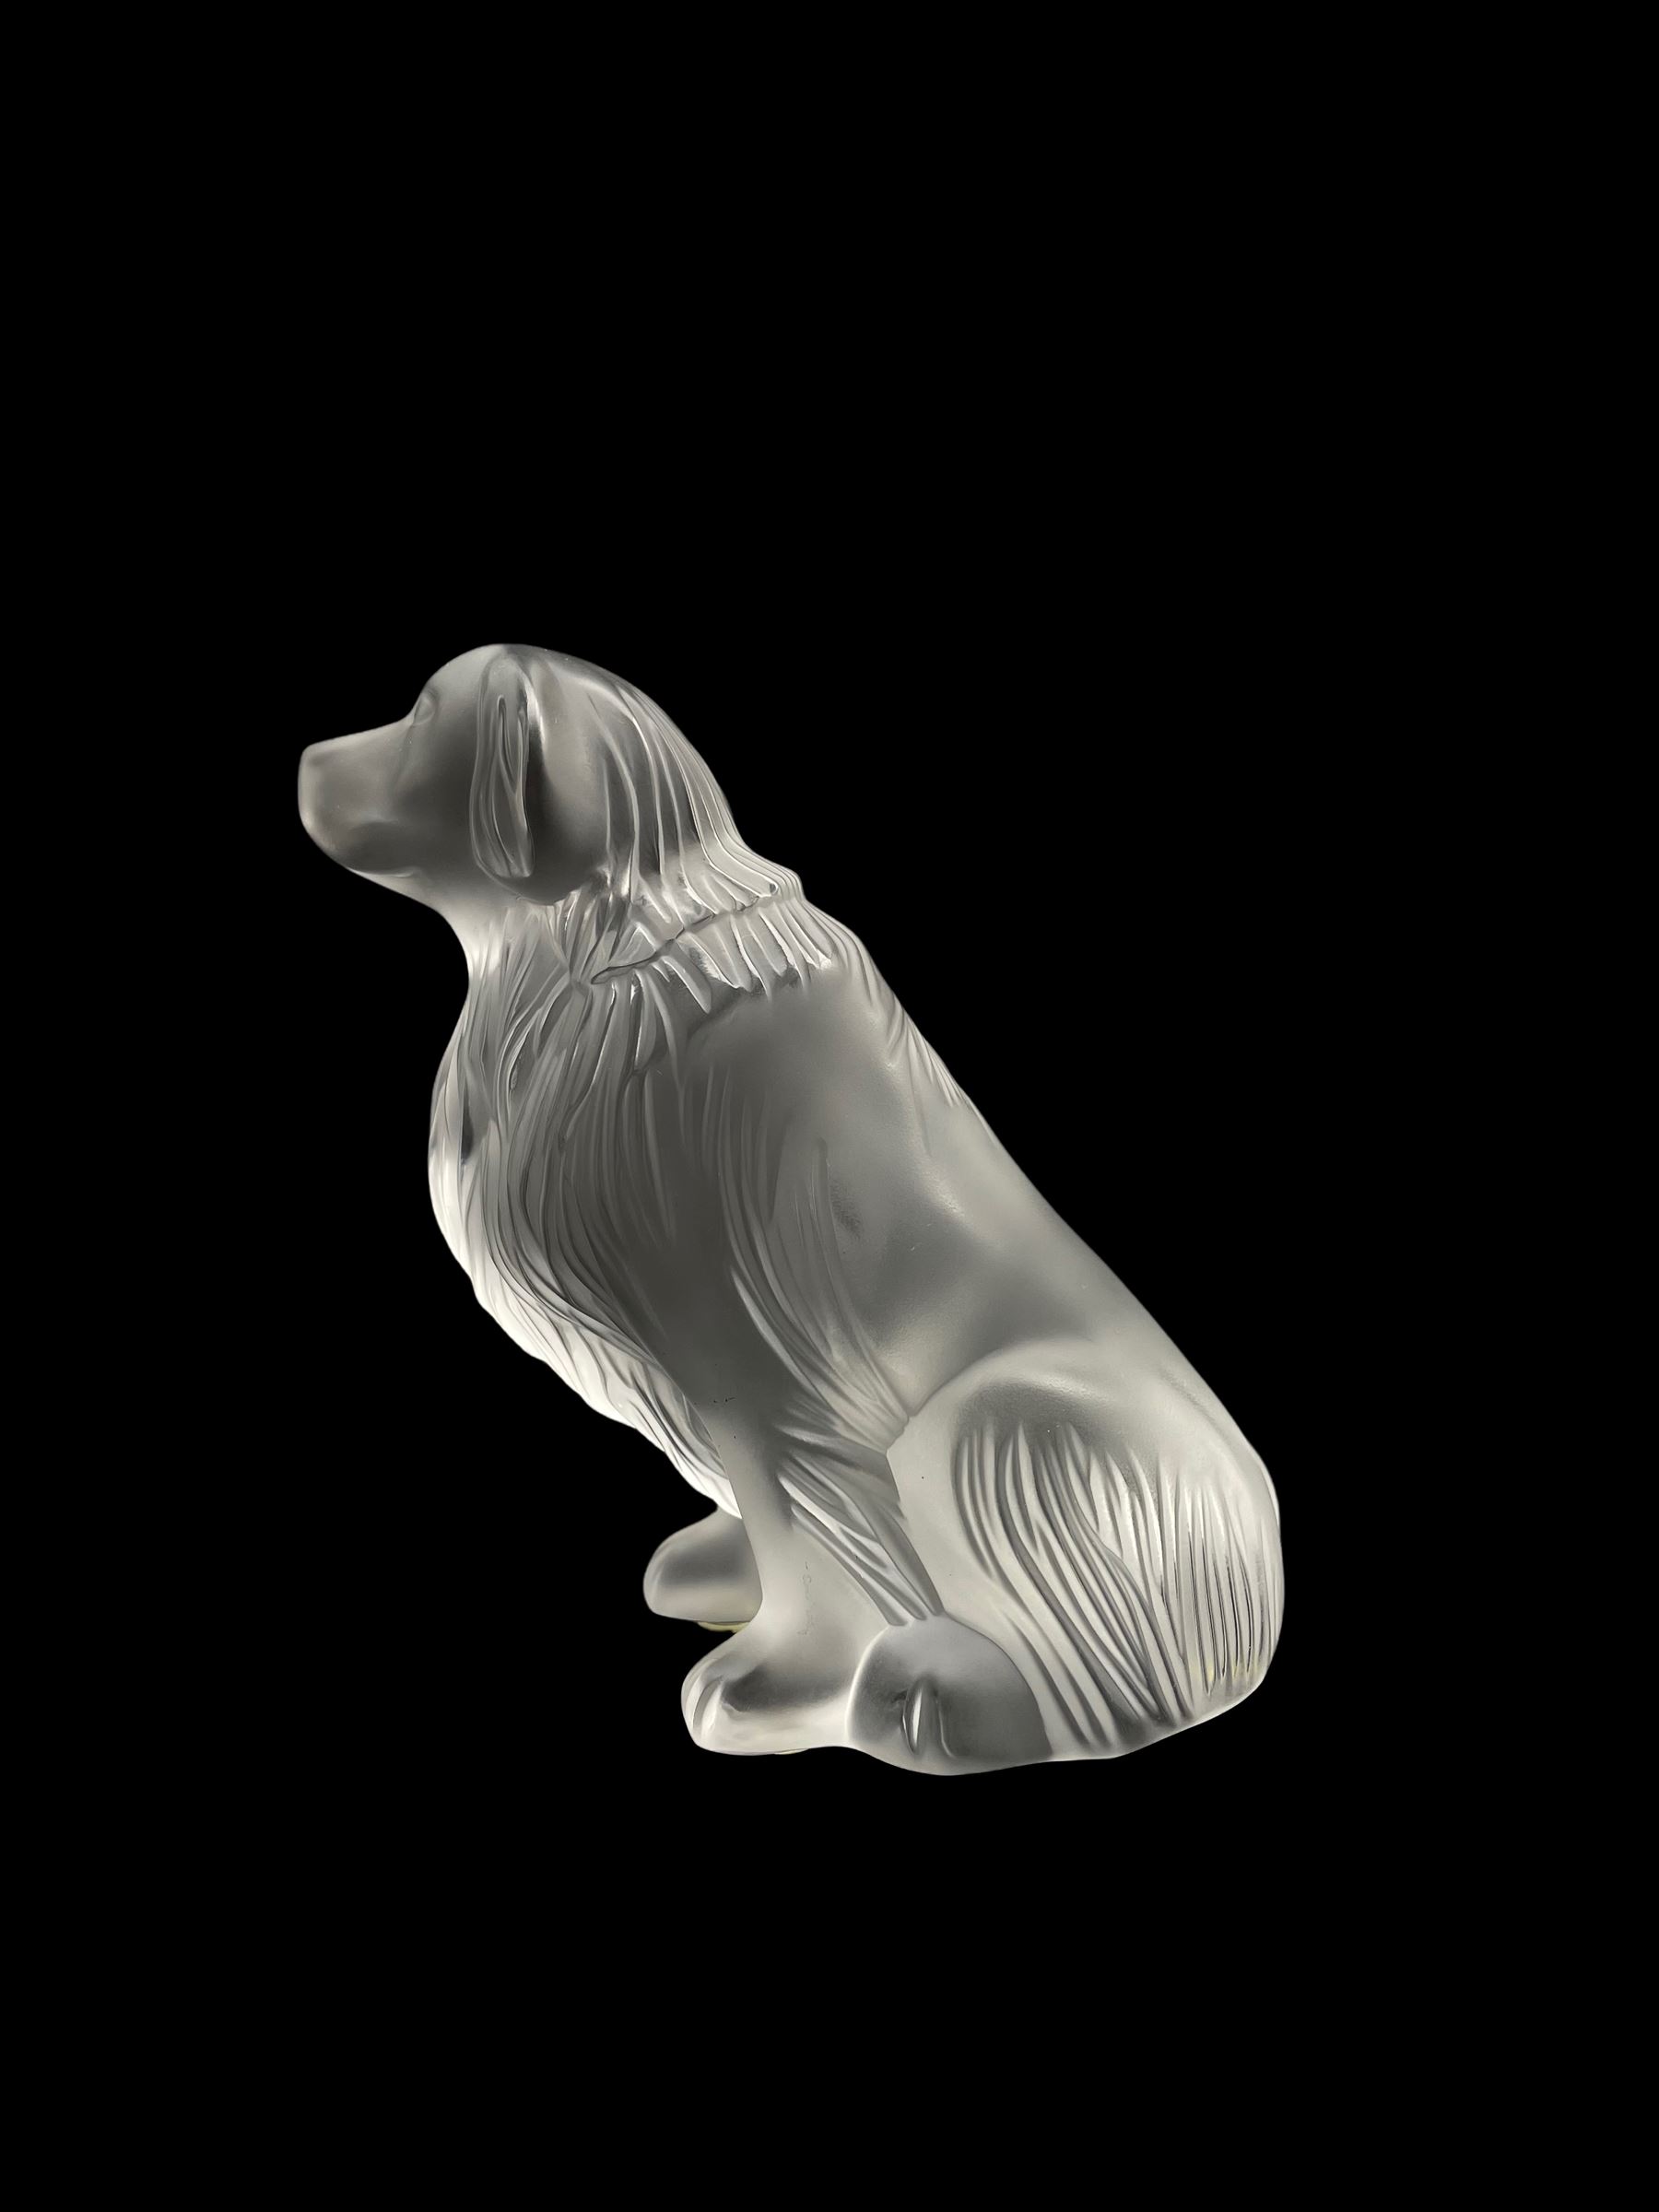 Lalique frosted glass model of a Golden Retriever - Image 2 of 3